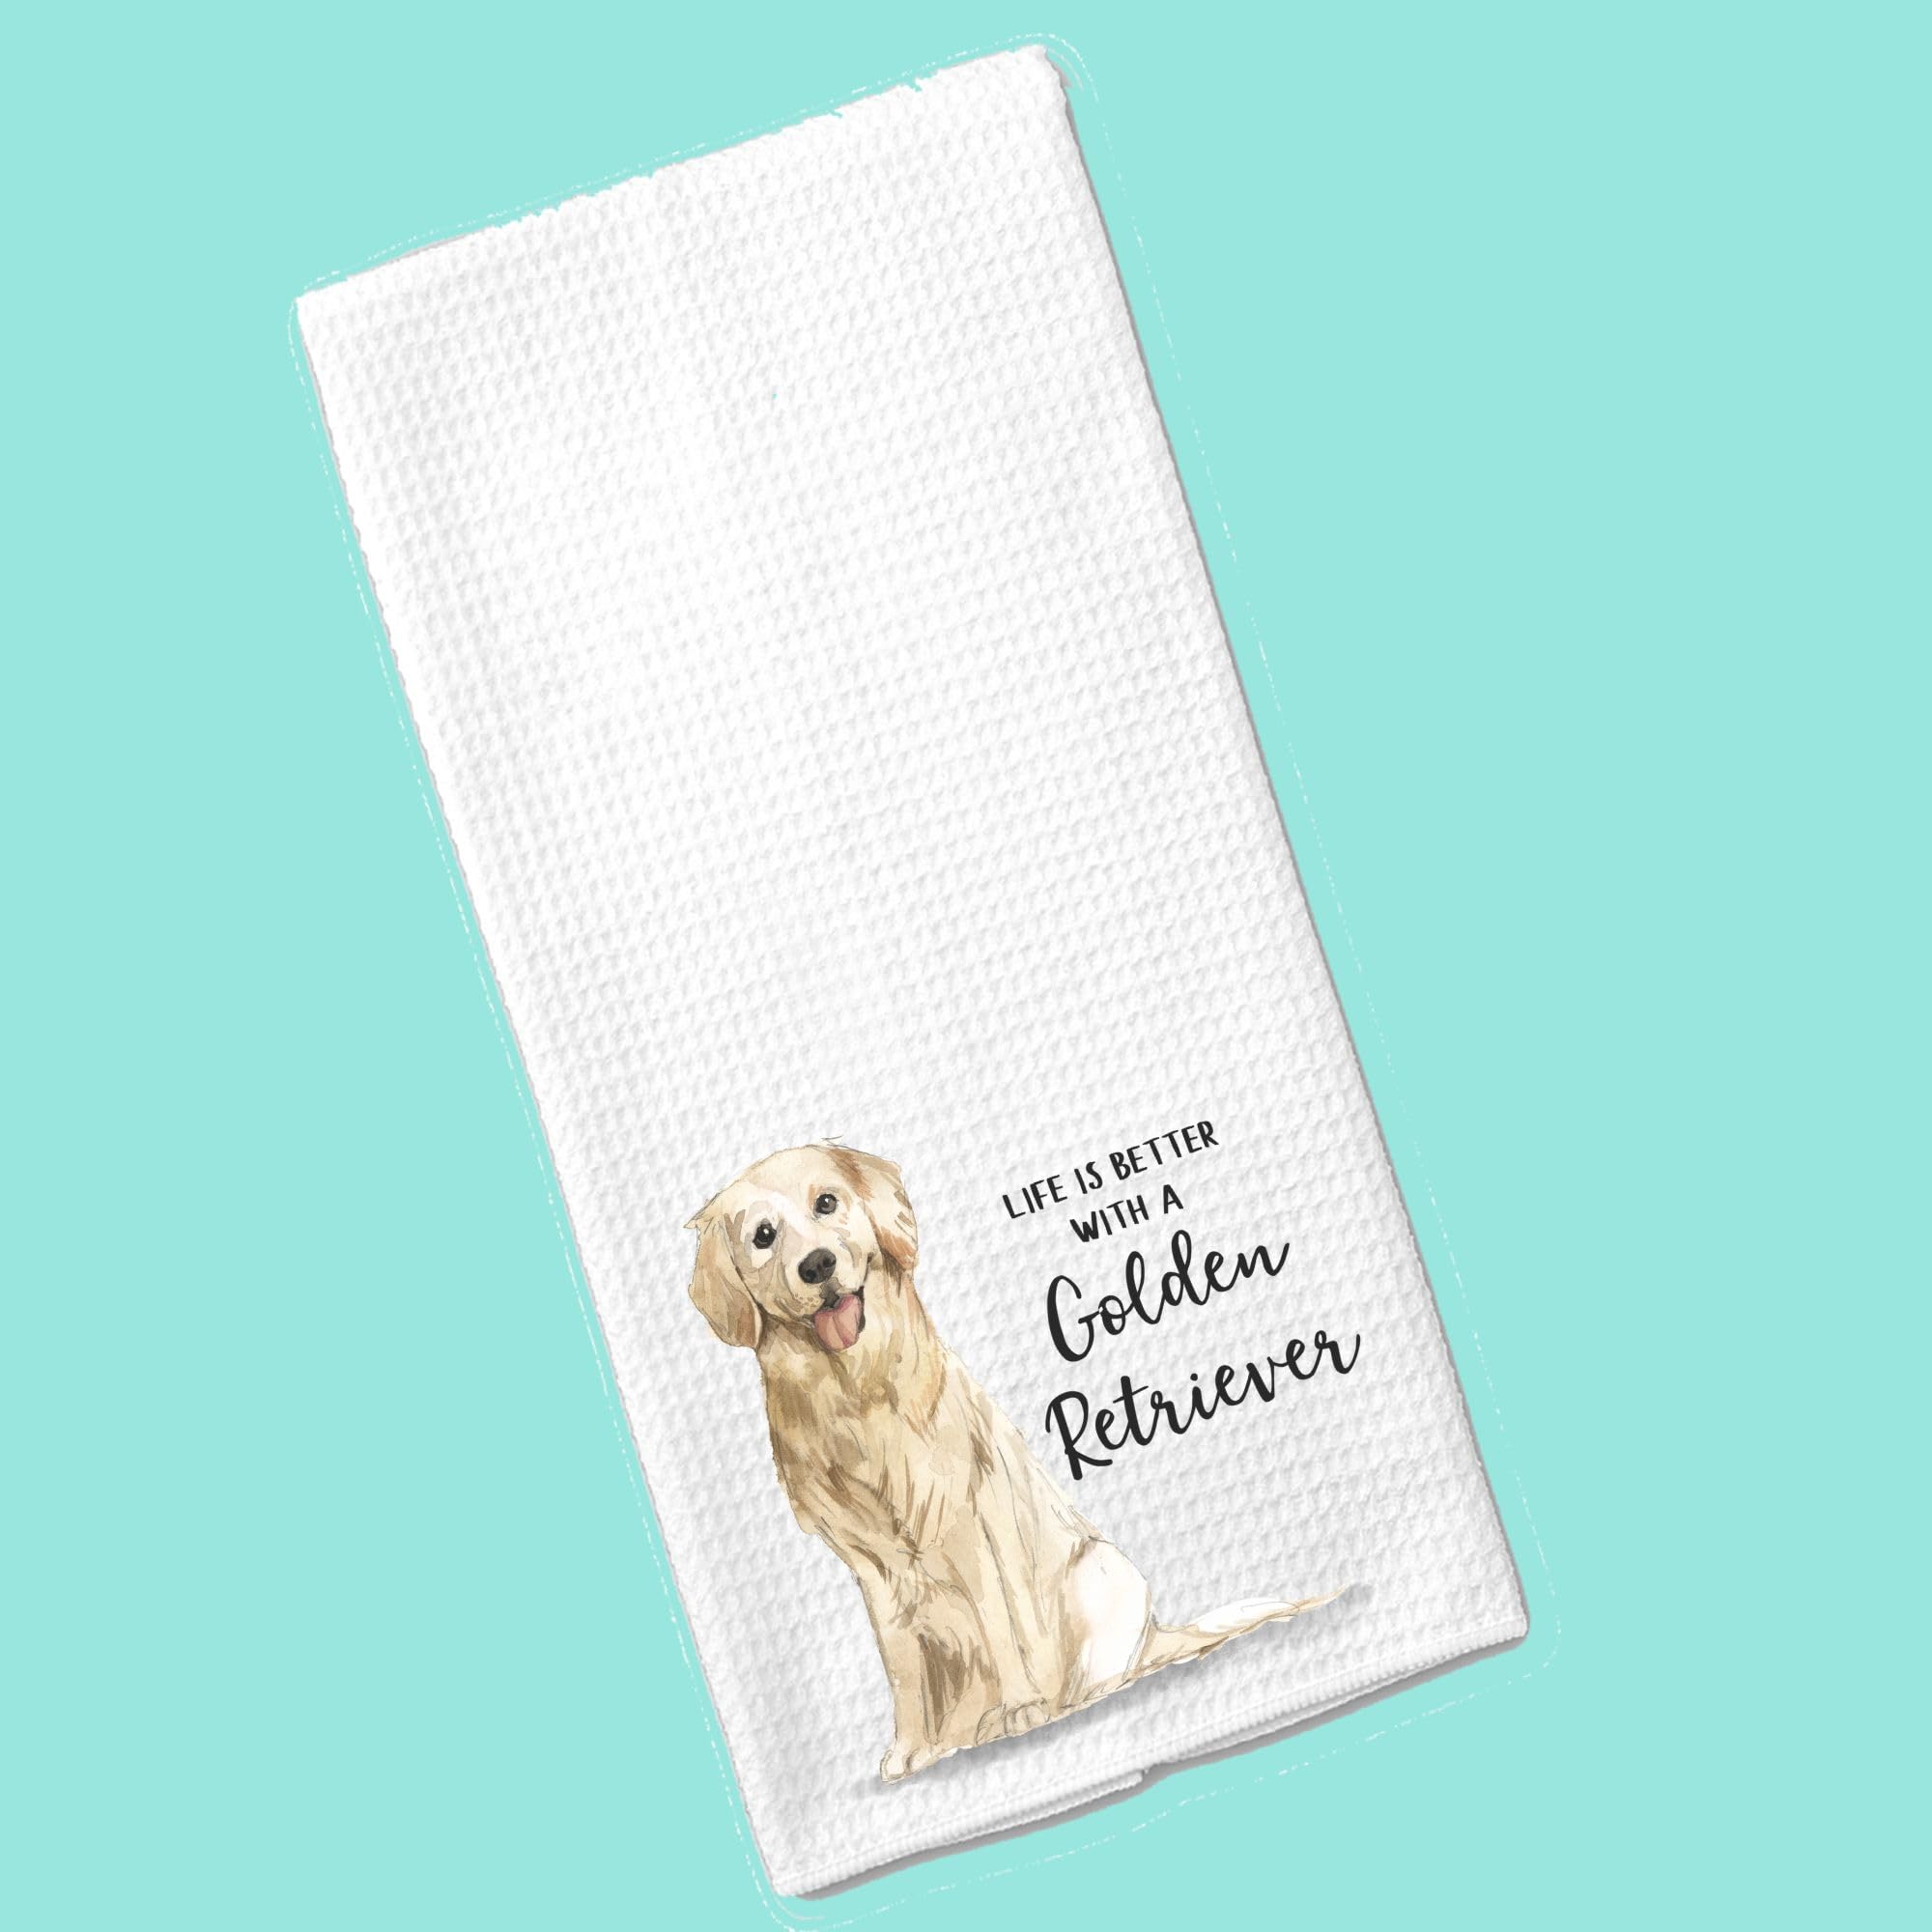 Watercolor Life is Better with a Golden Retriever Microfiber Kitchen Tea Bar Towel Gift for Animal Dog Lover